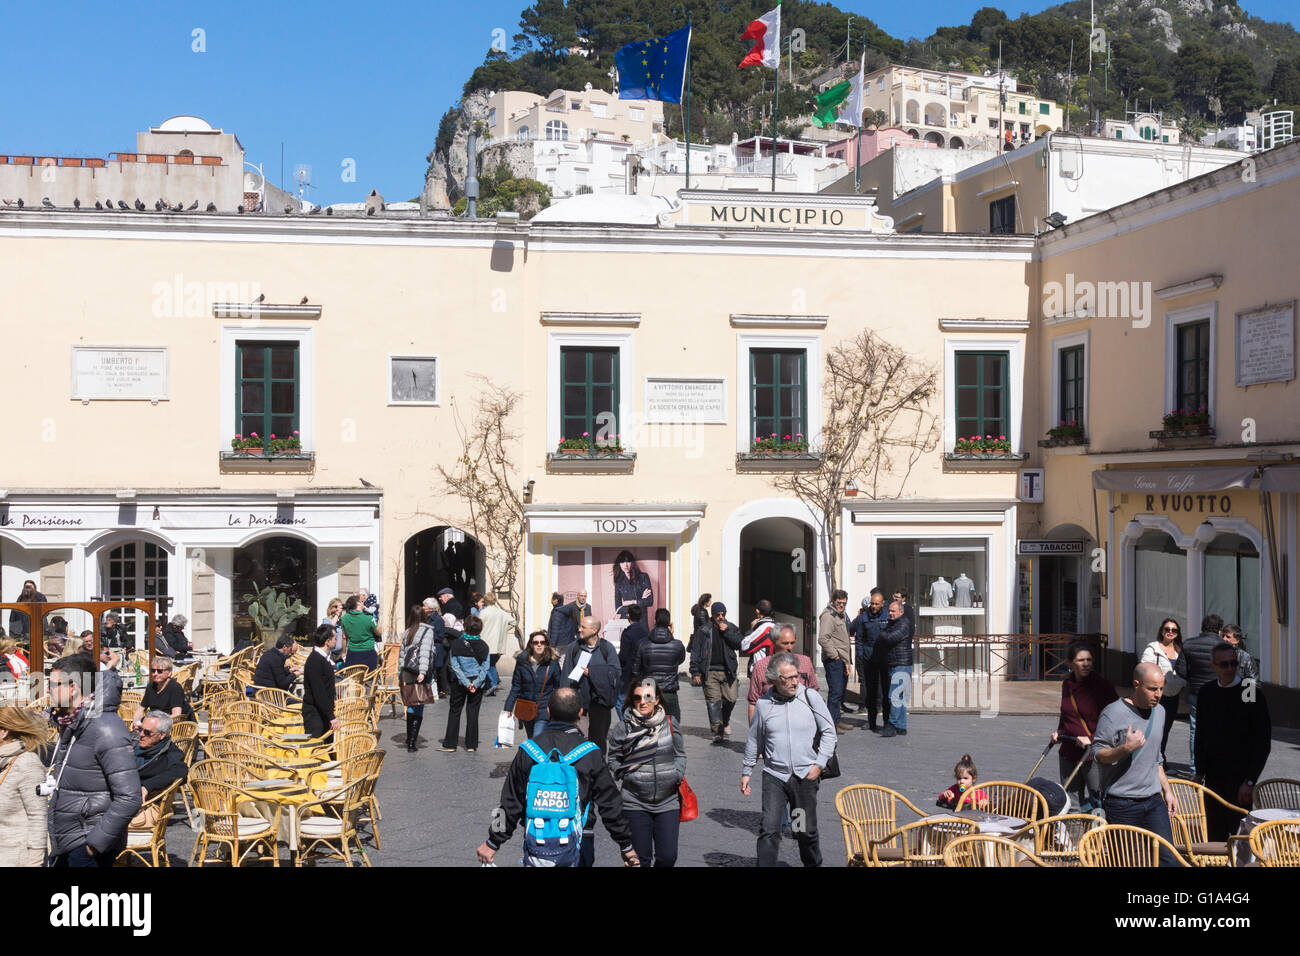 Tourists and locals mingling in the Piazza Umberto I, or Piazzetta di Capri (meaning 'little square'), the heart of social life in Capri. Italy Stock Photo